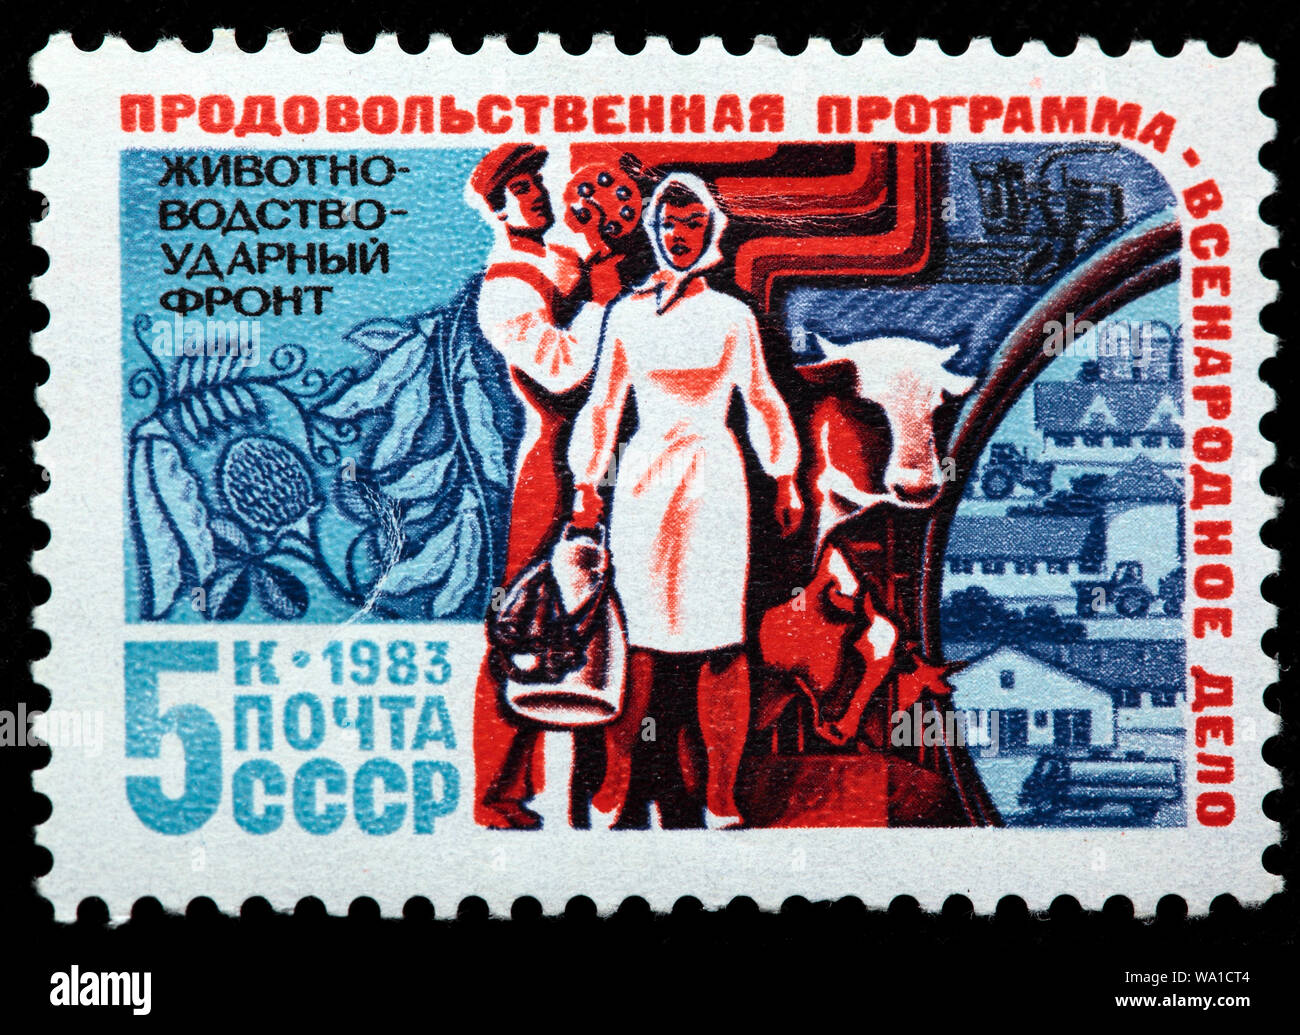 Cattle breeding, Food Programme, agriculture, postage stamp, Russia, USSR, 1983 Stock Photo